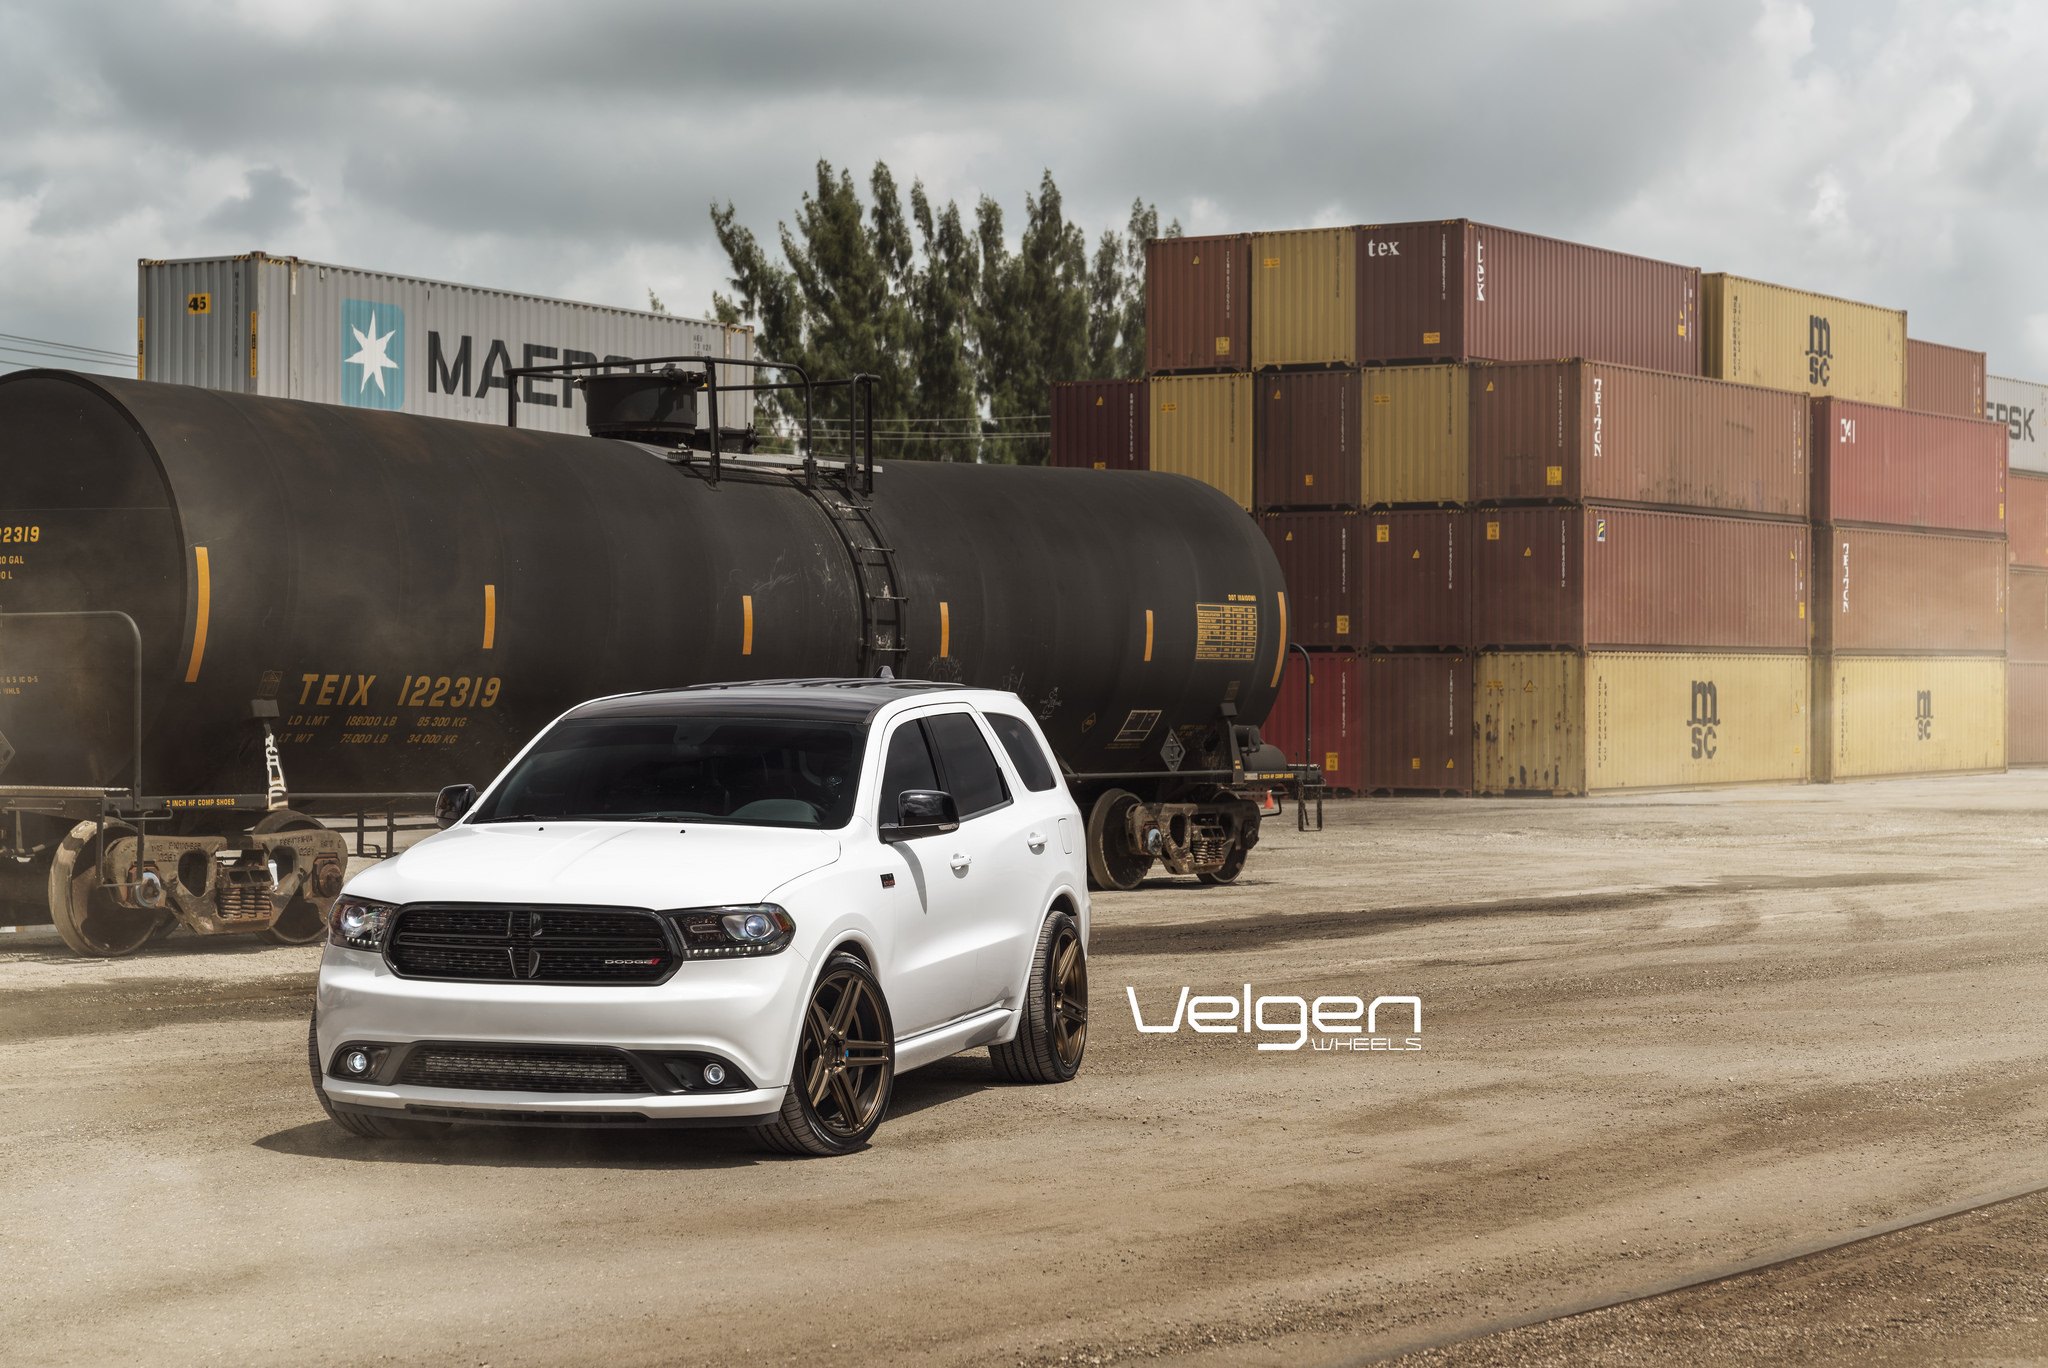 White Dodge Durango with Blacked Out Mesh Grille - Photo by Velgen